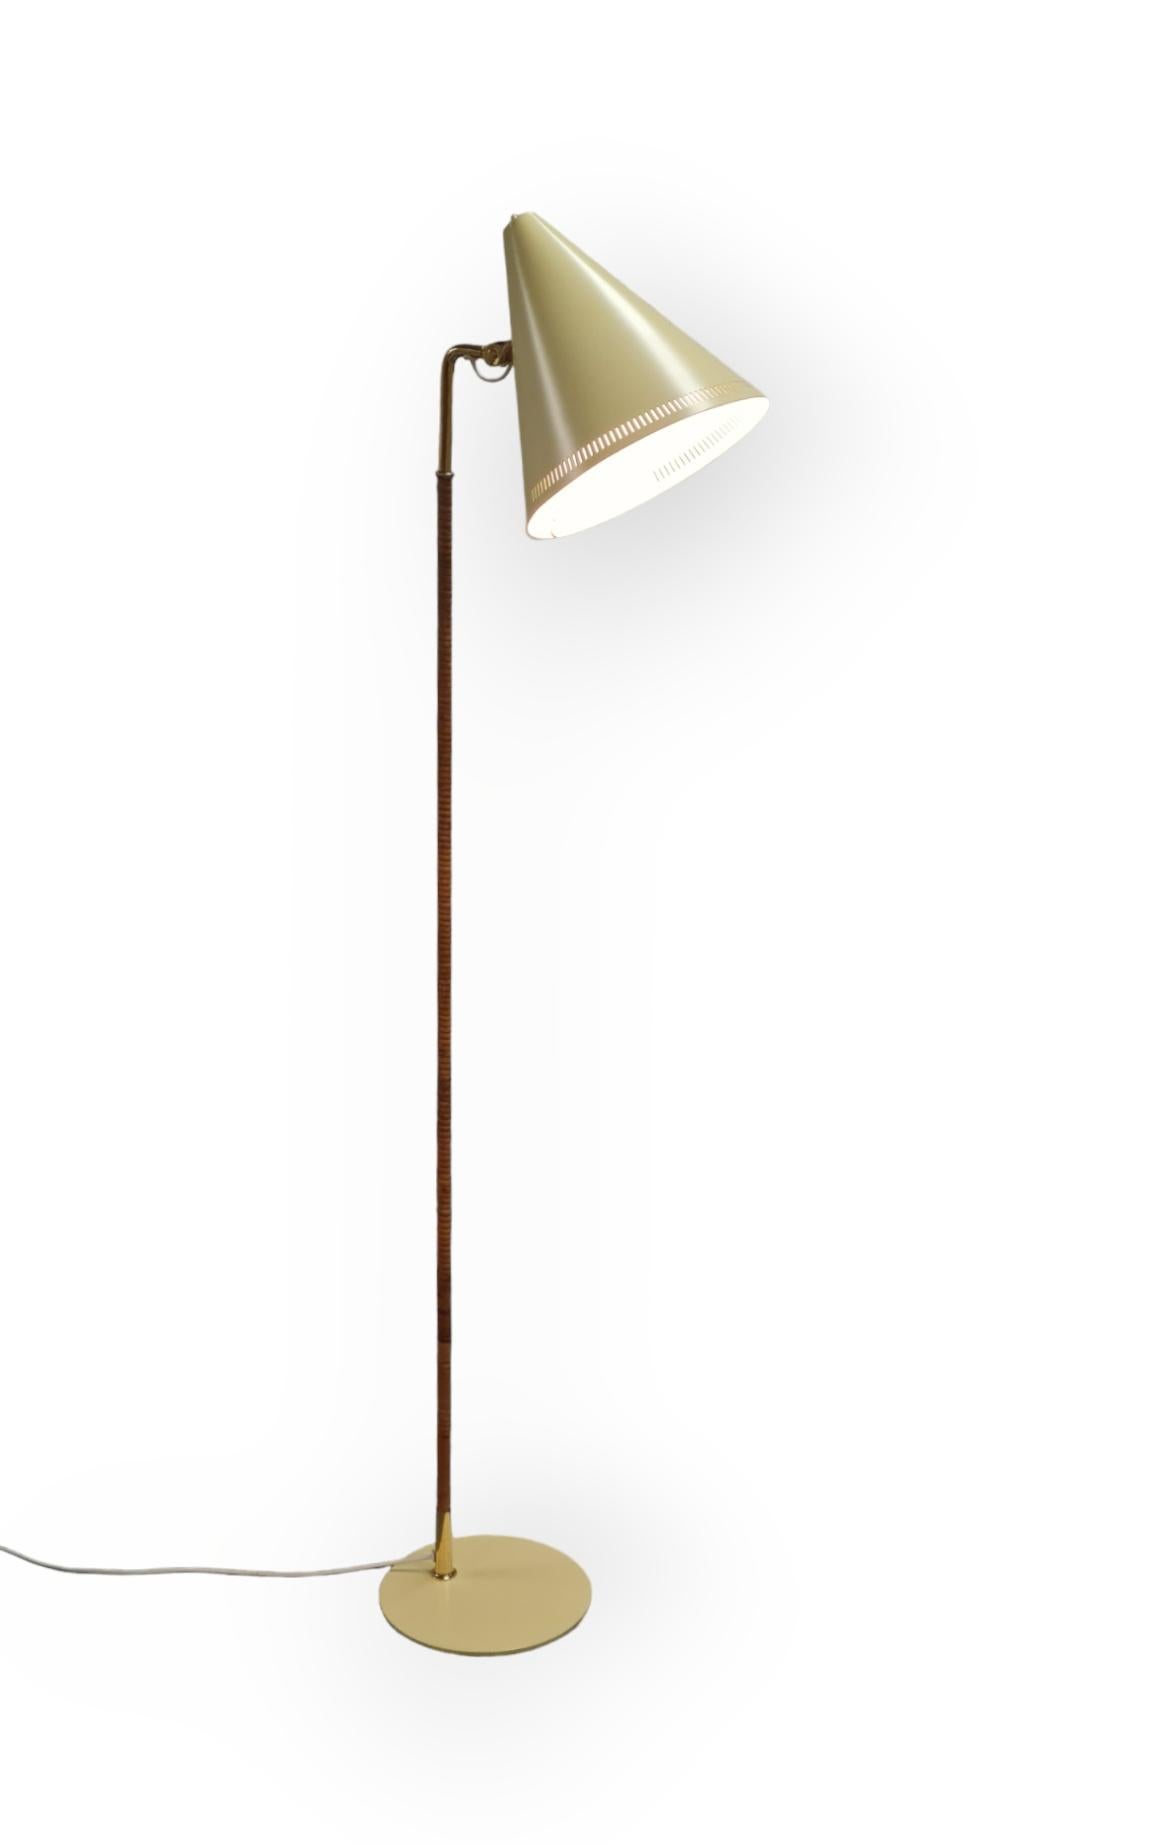 An iconic floor lamp model k10-10 designed by Paavo Tynell for Idman in the 1950s. The lamp has been repainted in yellow, as an alternative for the black and white versions that are the most frequent colours. The item is otherwise in complete